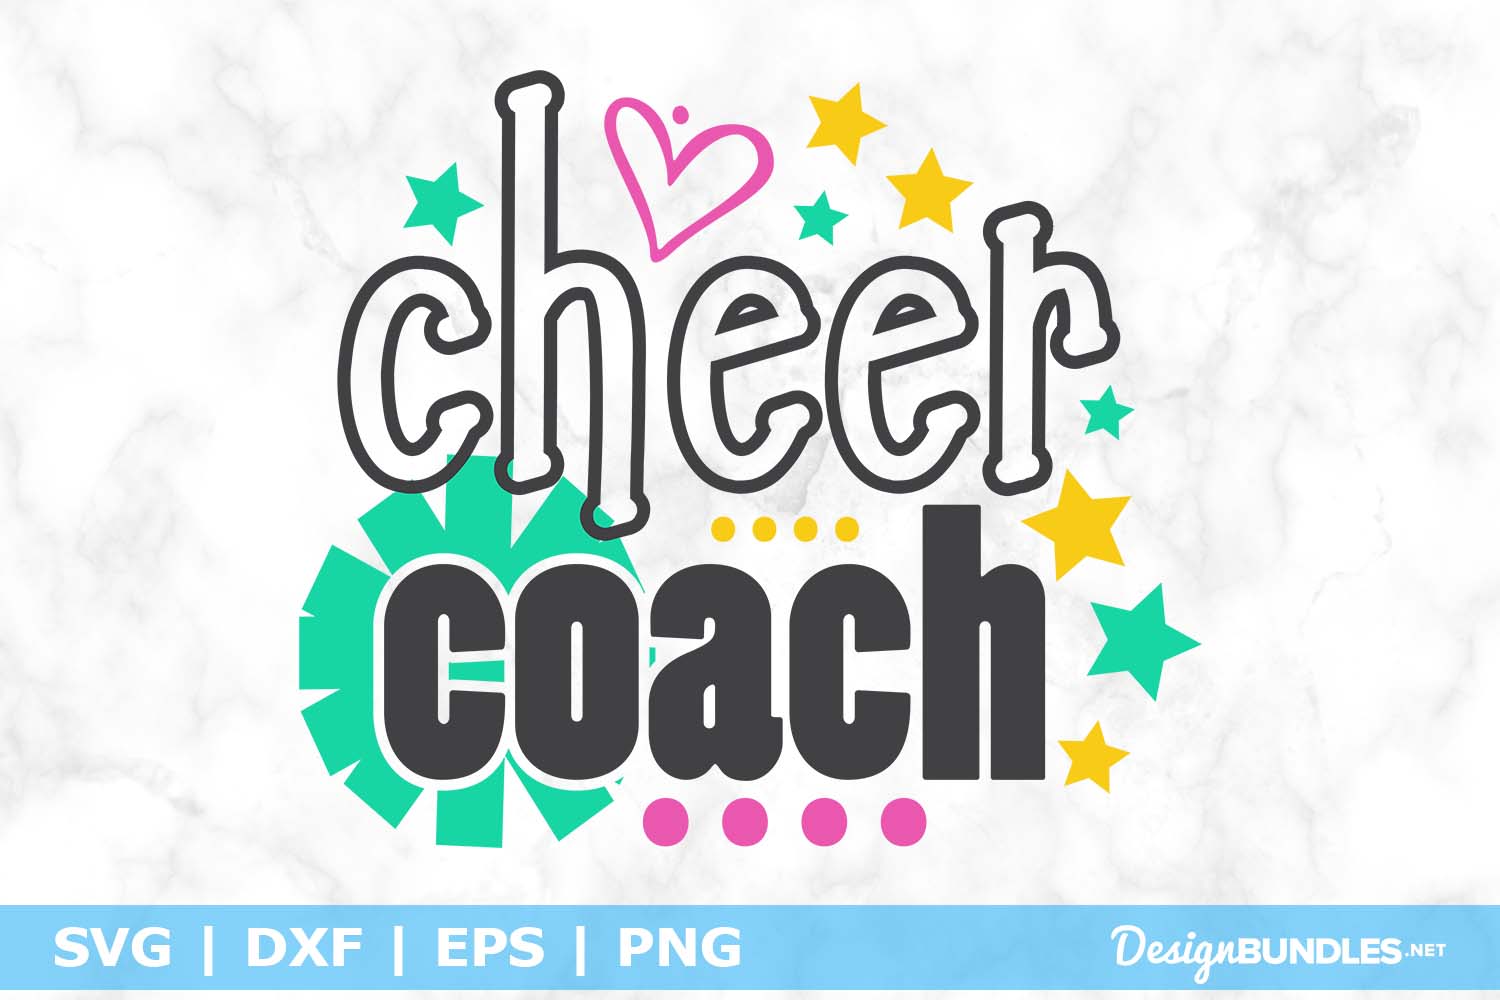 Cheer Coach Svg File